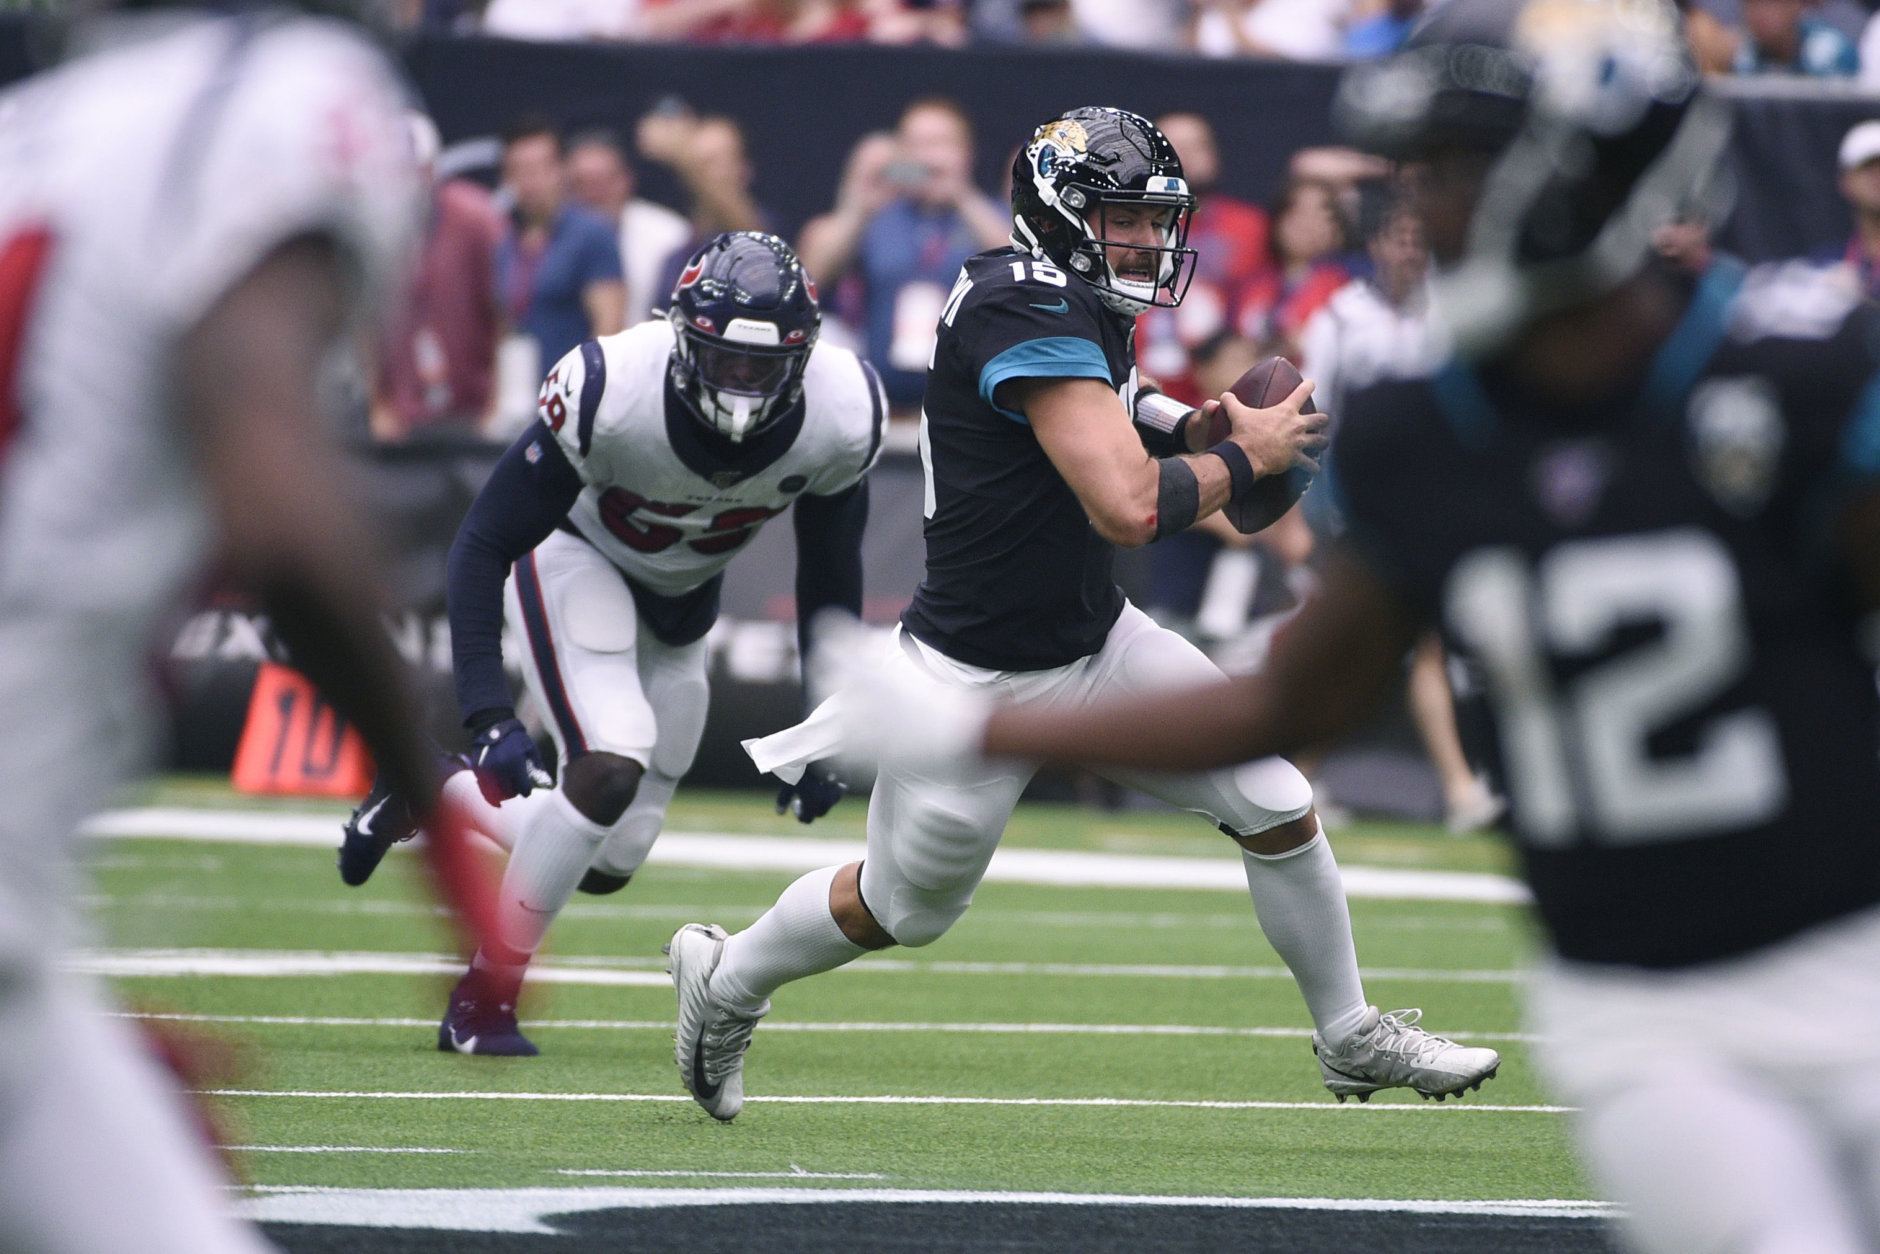 <p><em><strong>Jaguars 12</strong></em><br />
<em><strong>Texans 13</strong></em></p>
<p>Gardner Minshew actually played more like Deshaun Watson than Deshaun Watson did, and might have stole one in Houston if Leonard Fournette could reclaim his rookie form. Jacksonville is wasting one of the best defenses in the league.</p>
